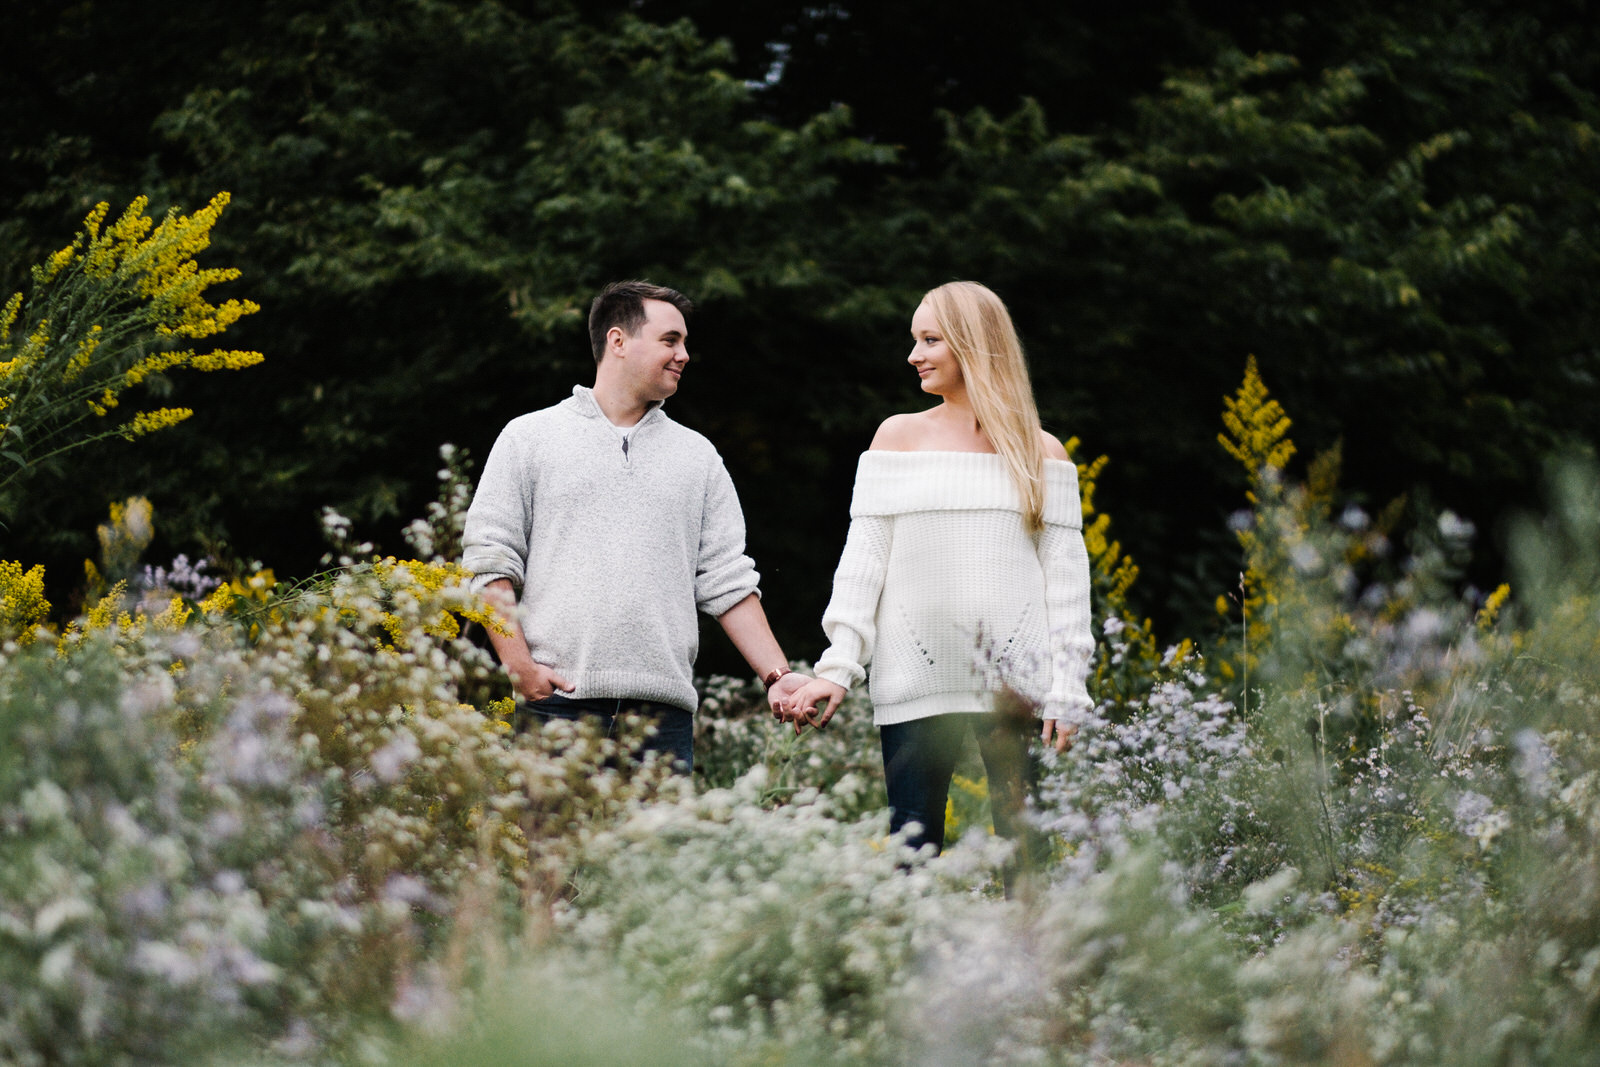 Couple standing amongst wild flowers looking at one another at the Montrose Harbor Bird Sanctuary. Wedding photography by Michael & Kristin Photo and Video